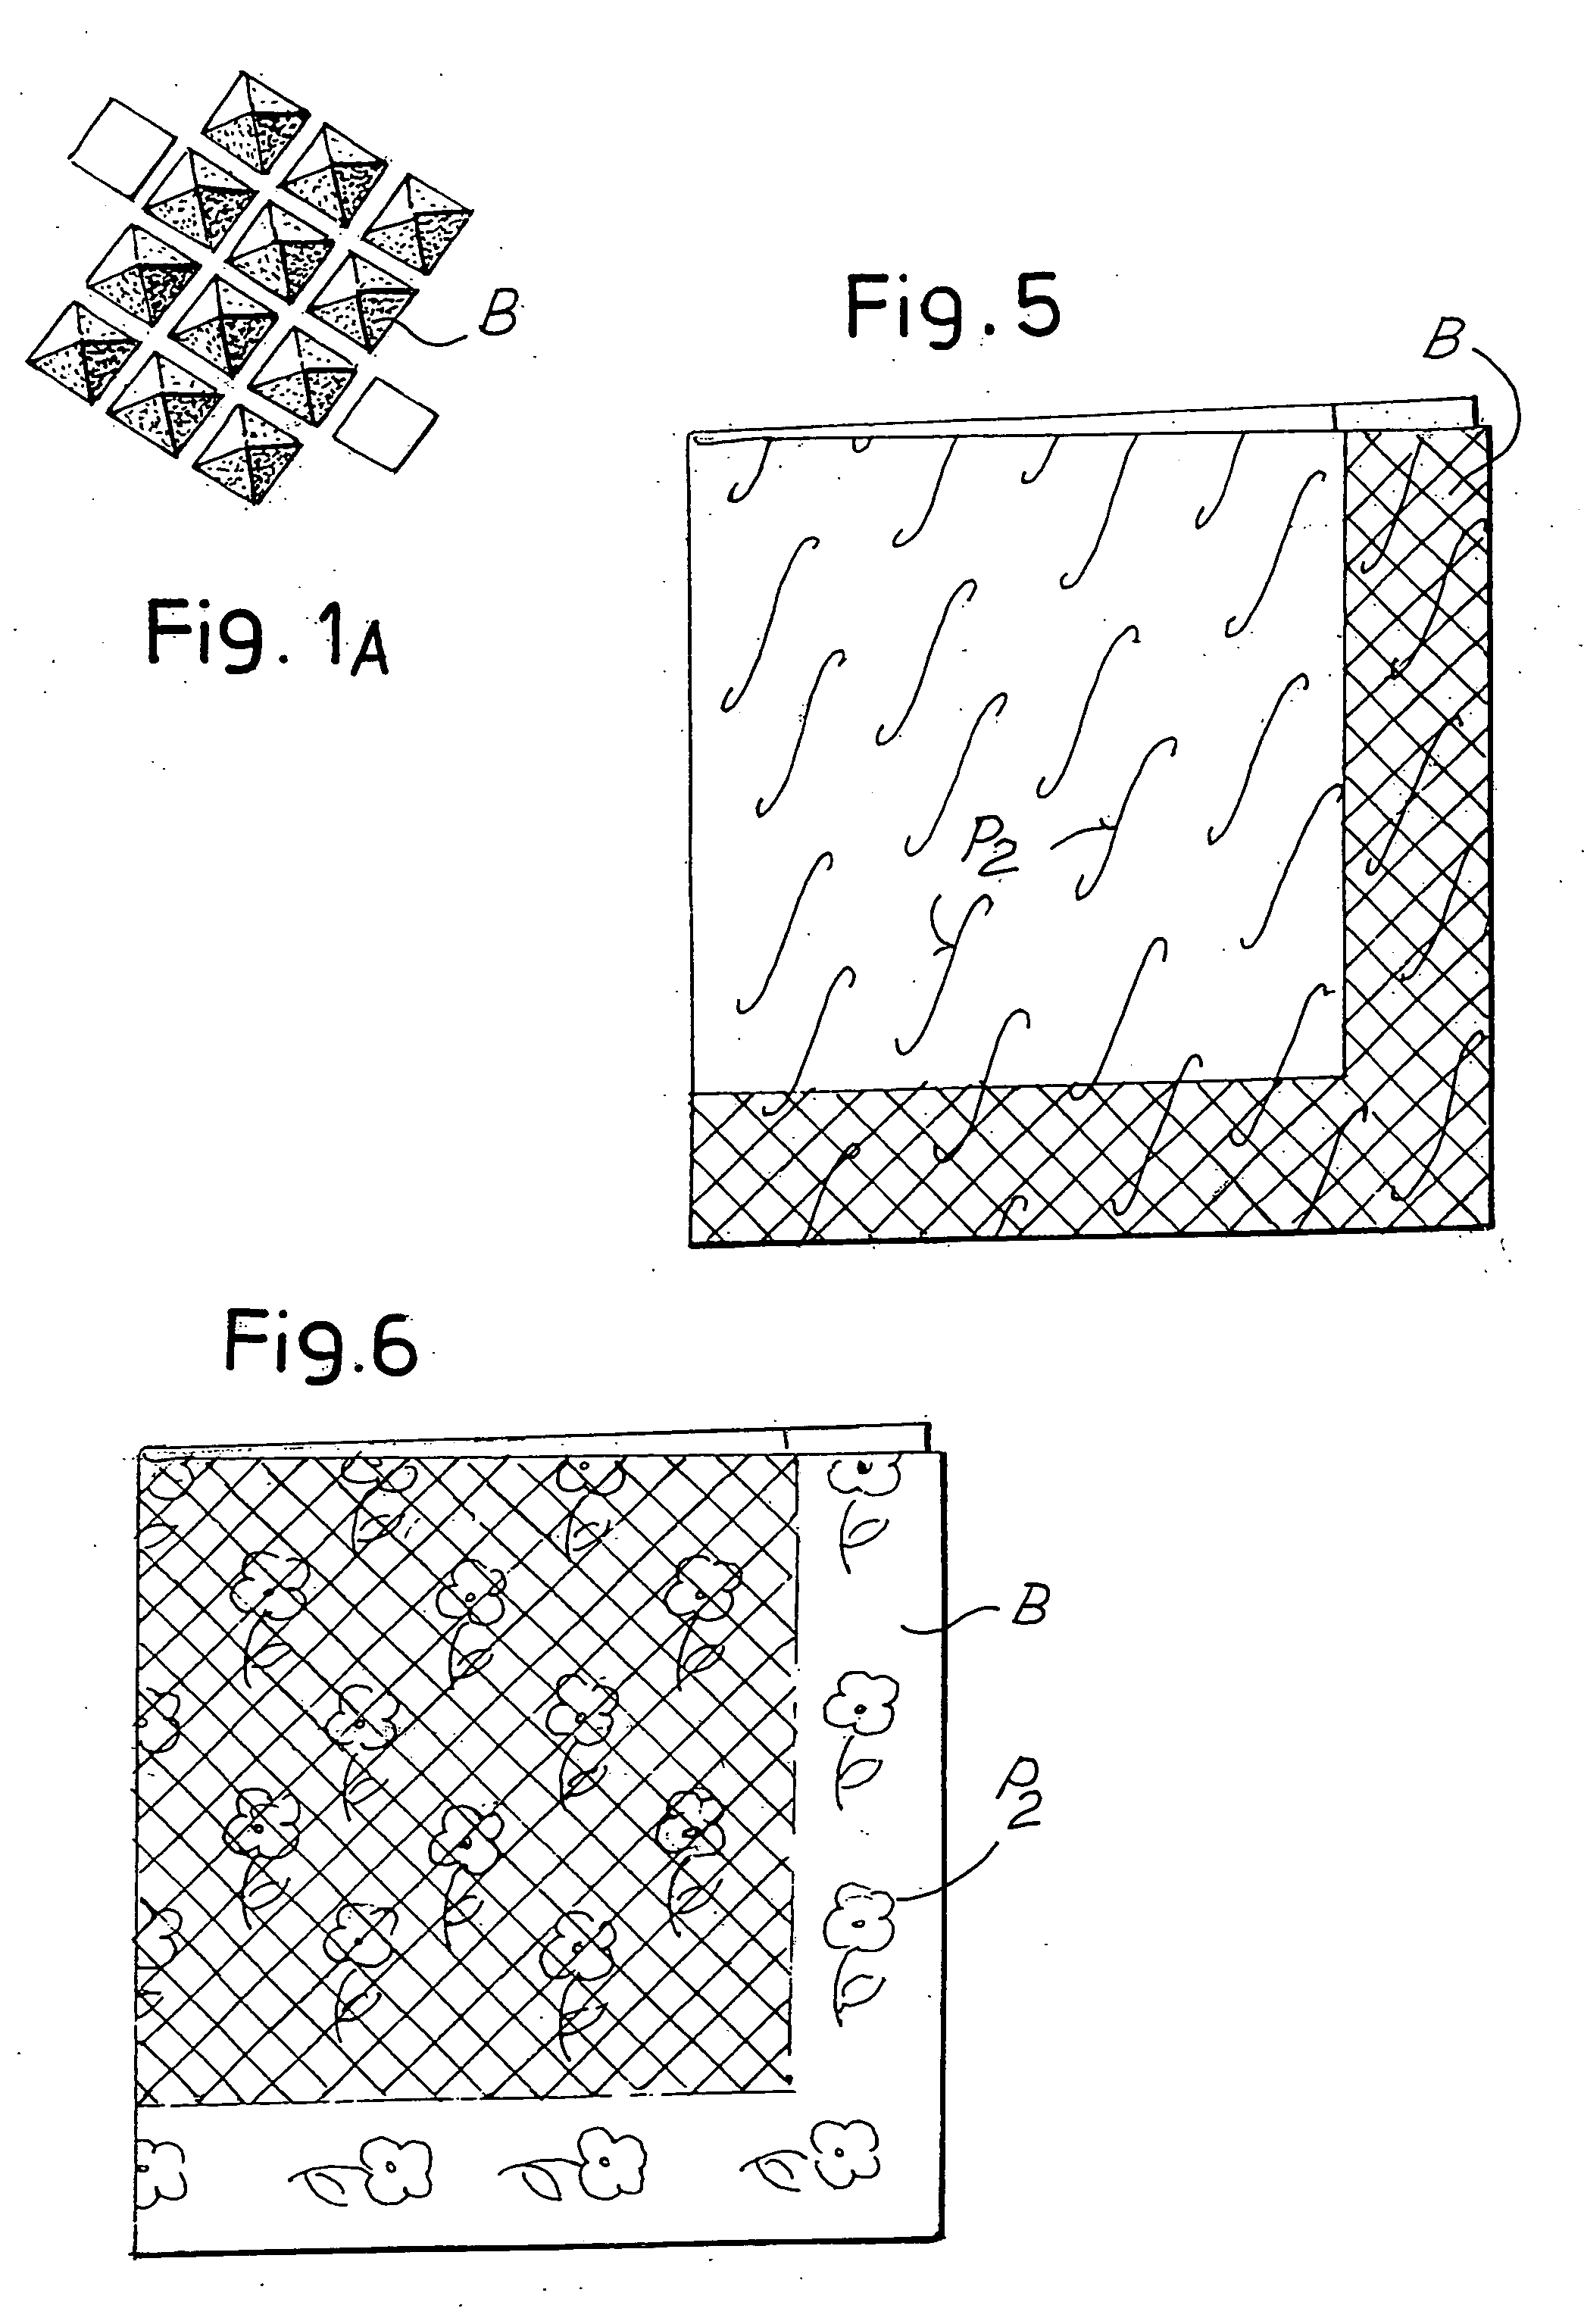 Paper napkin or similar product, printed and embossed